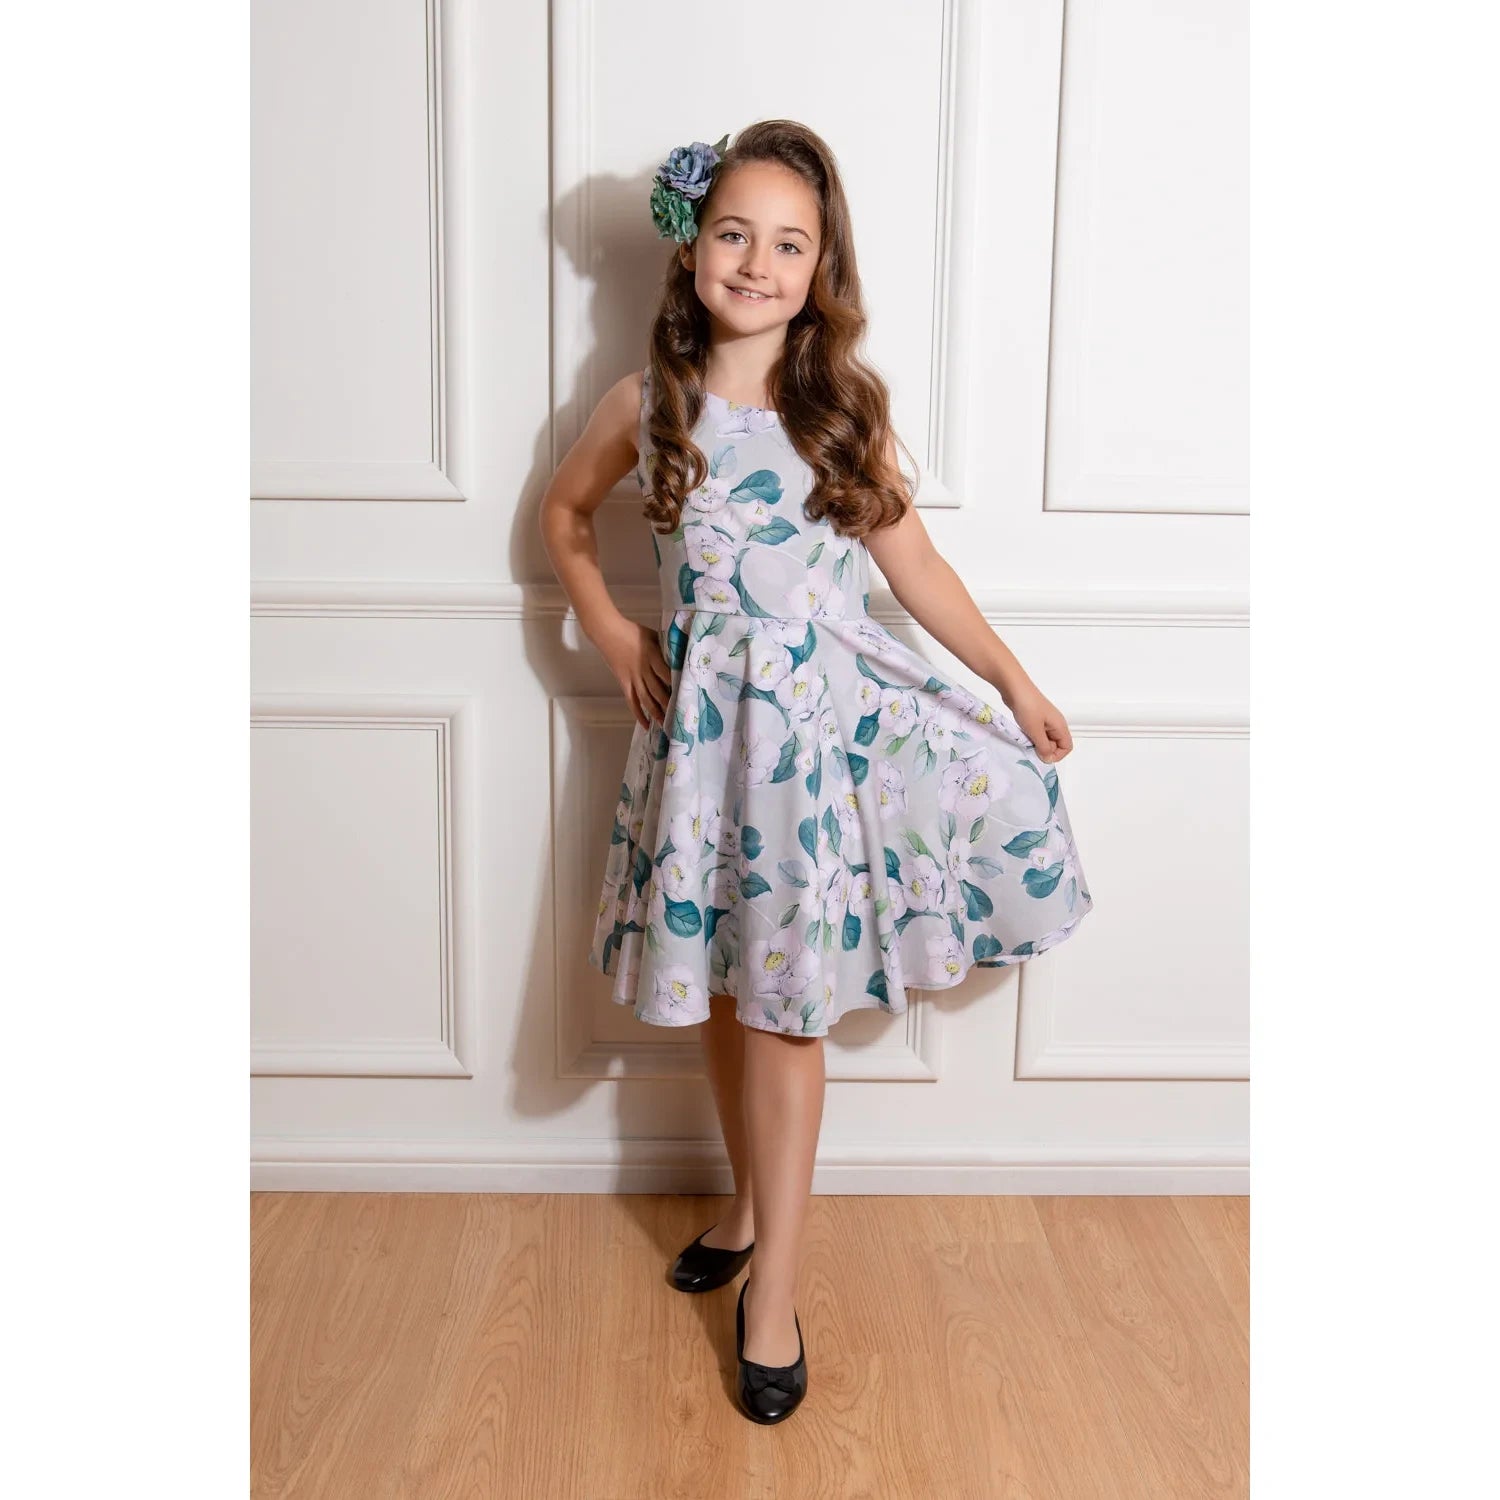 Little Kitty Girl's Pastel Purple Floral Print Party Dress